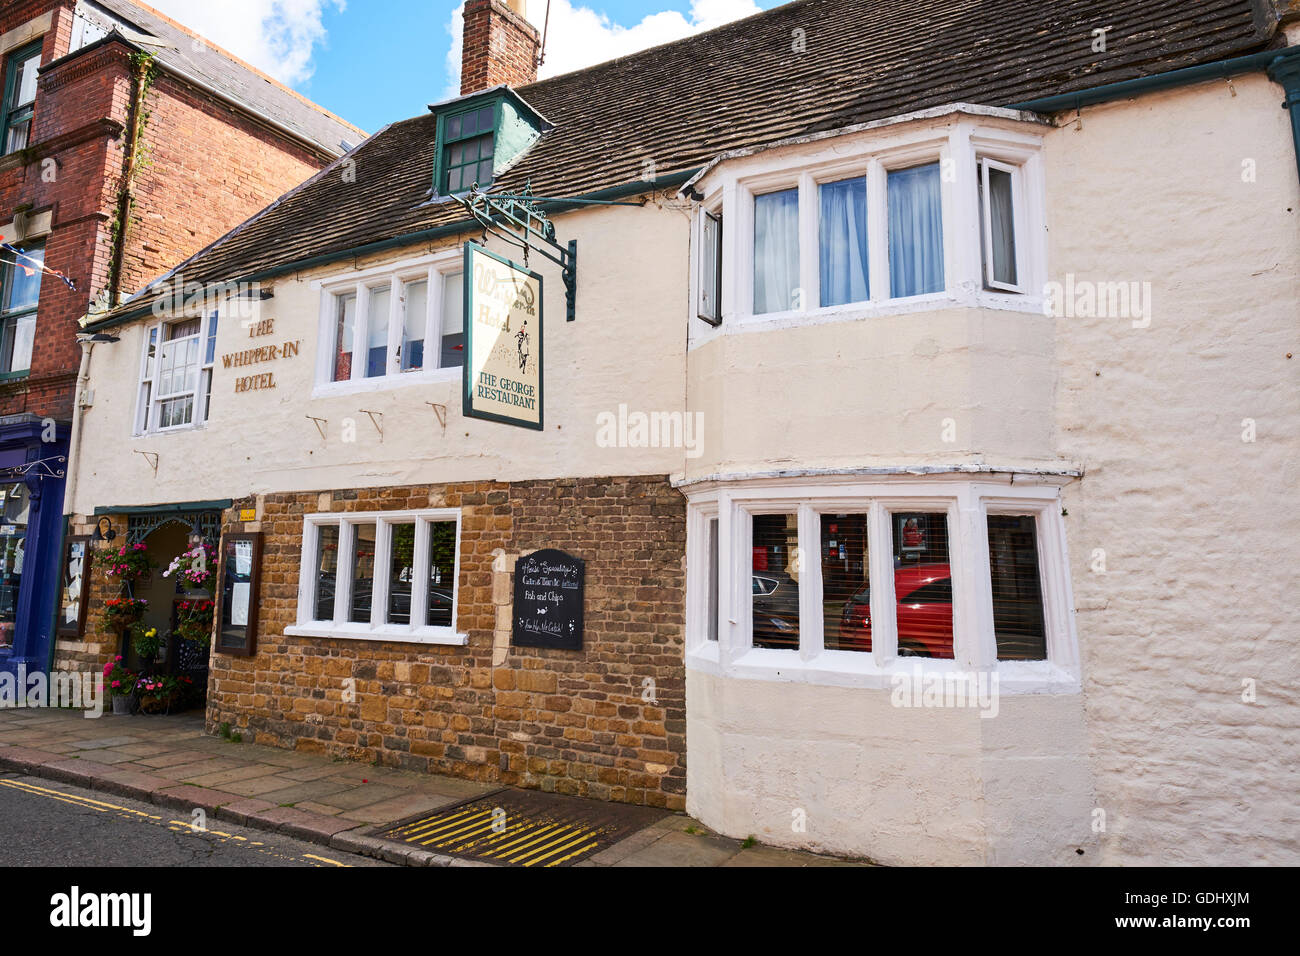 The Whipper-In Hotel A Former 17th Century Coaching Inn Market Place Oakham Rutland East Midlands UK Stock Photo